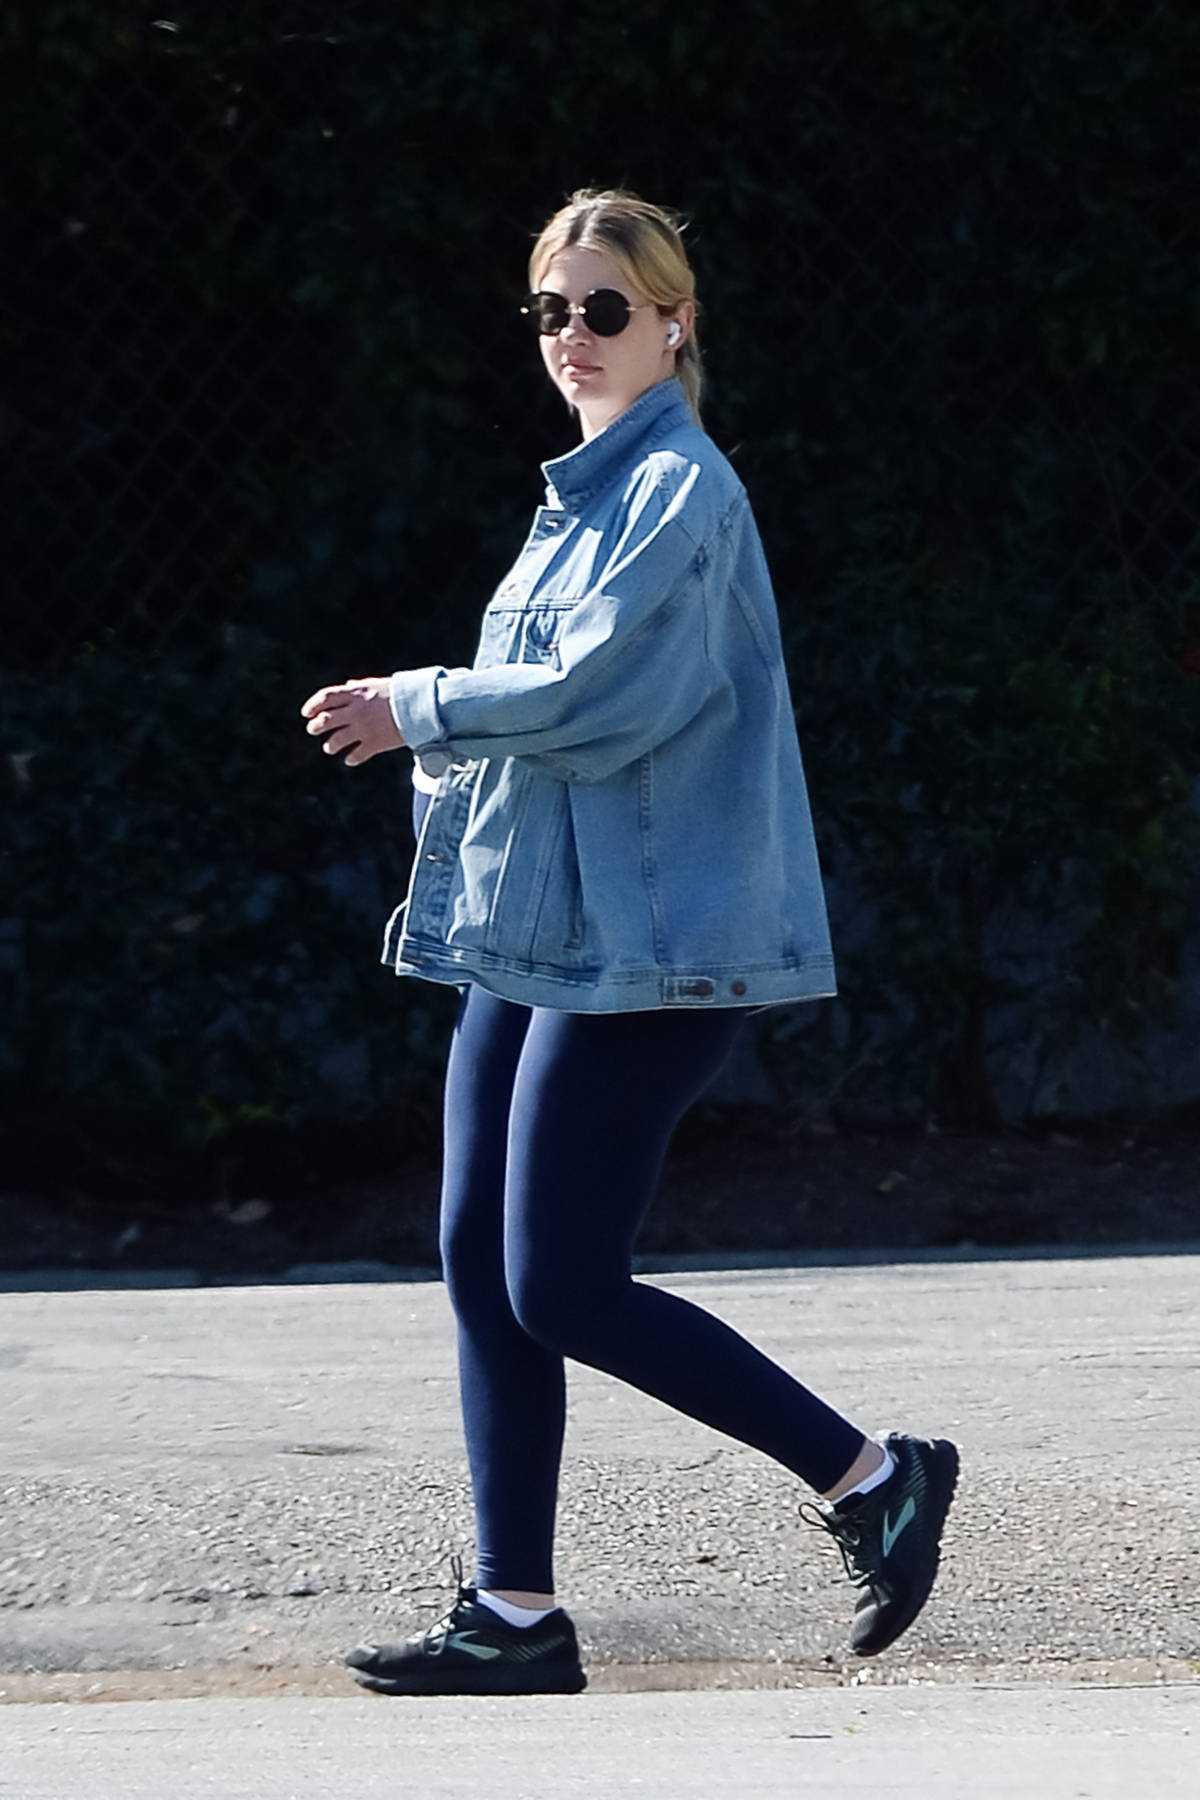 mia goth shows her huge baby bump in a white tee and navy blue